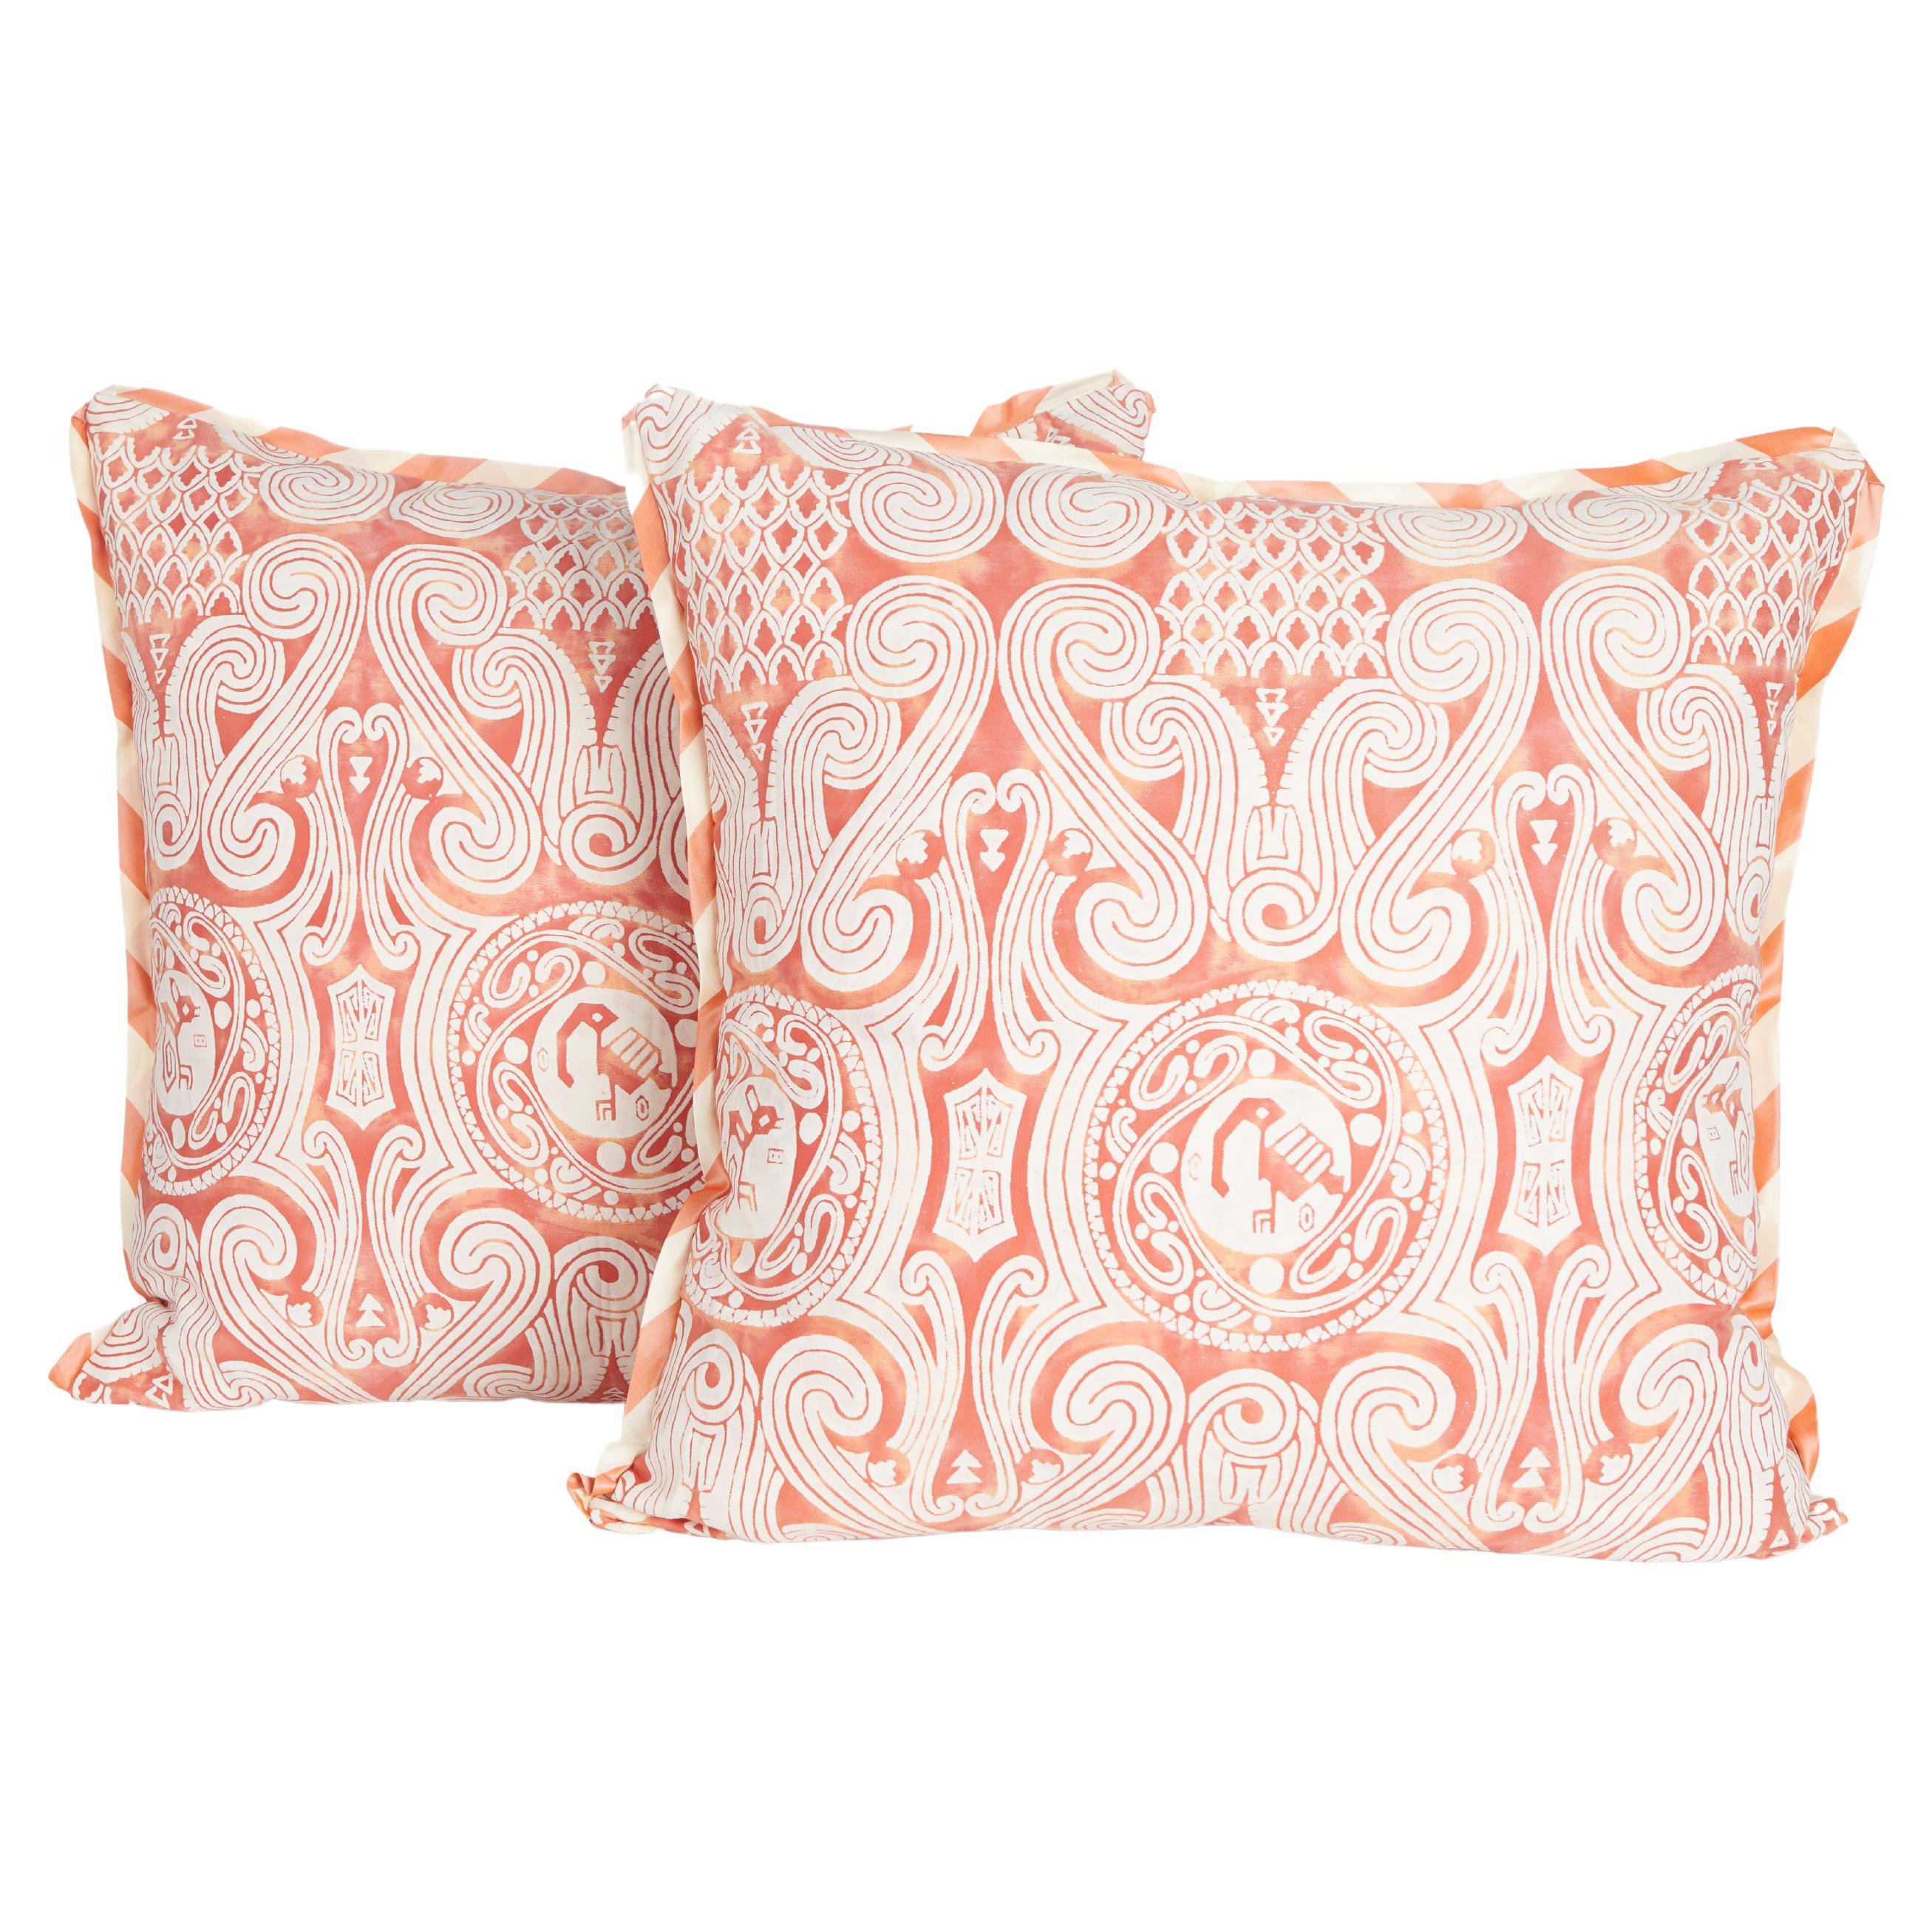 Pair of Fortuny Cushions in the Peruviano Pattern in Orange and White